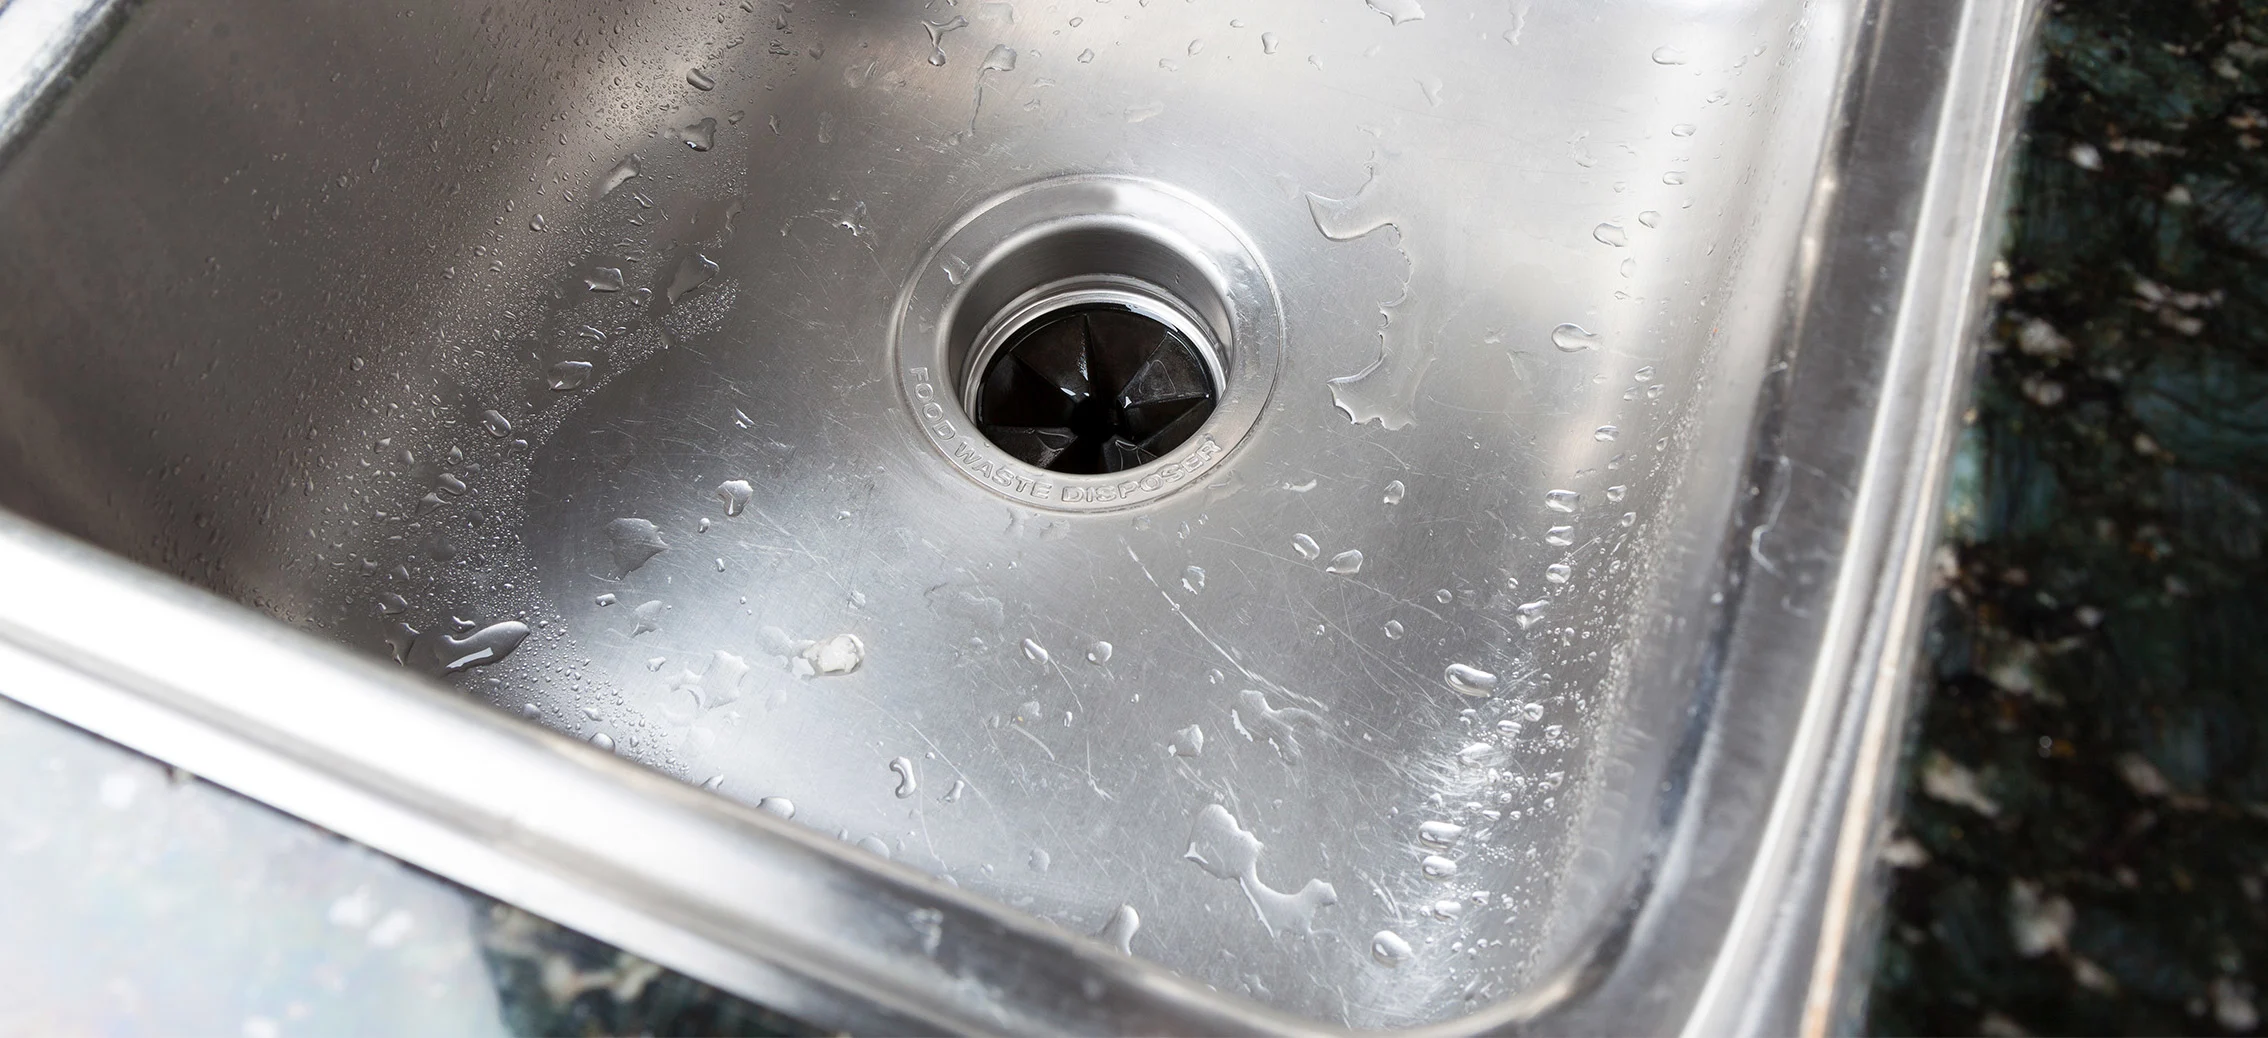 How To Clean Garbage Disposal